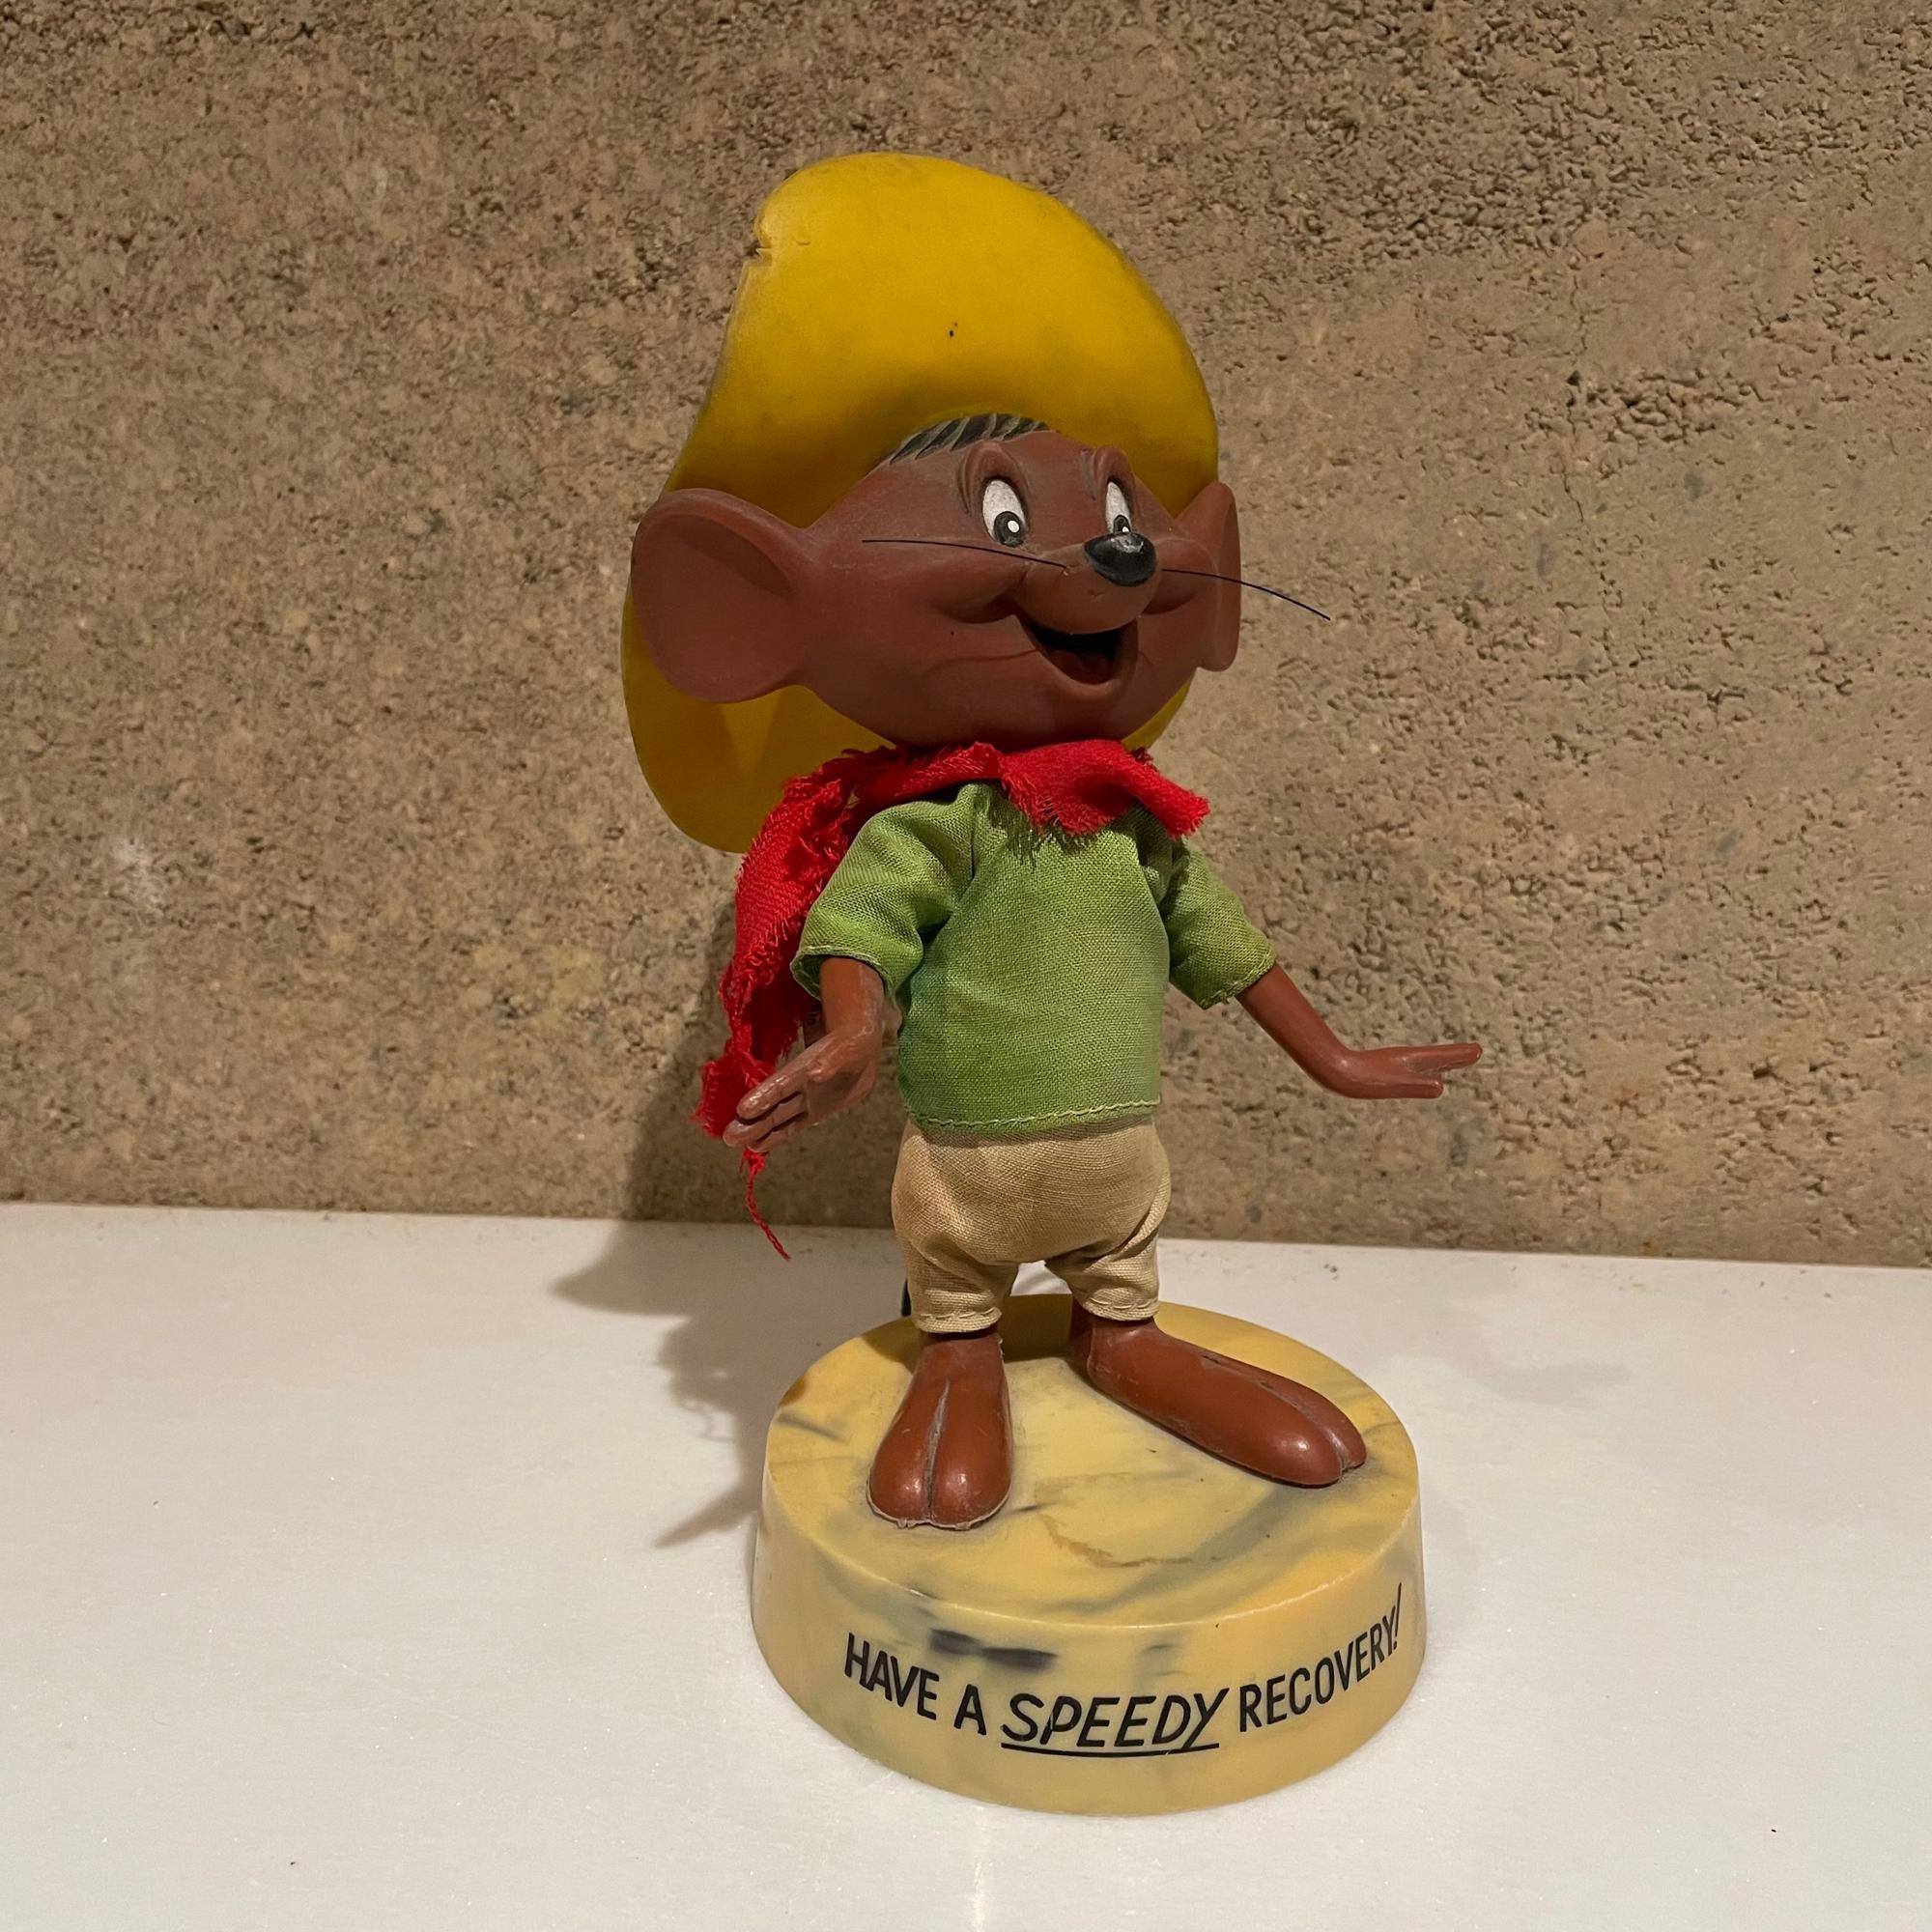 Late 20th Century 1971 Too Cute Speedy Gonzales Have a SPEEDY RECOVERY Looney Tunes Warner Bros